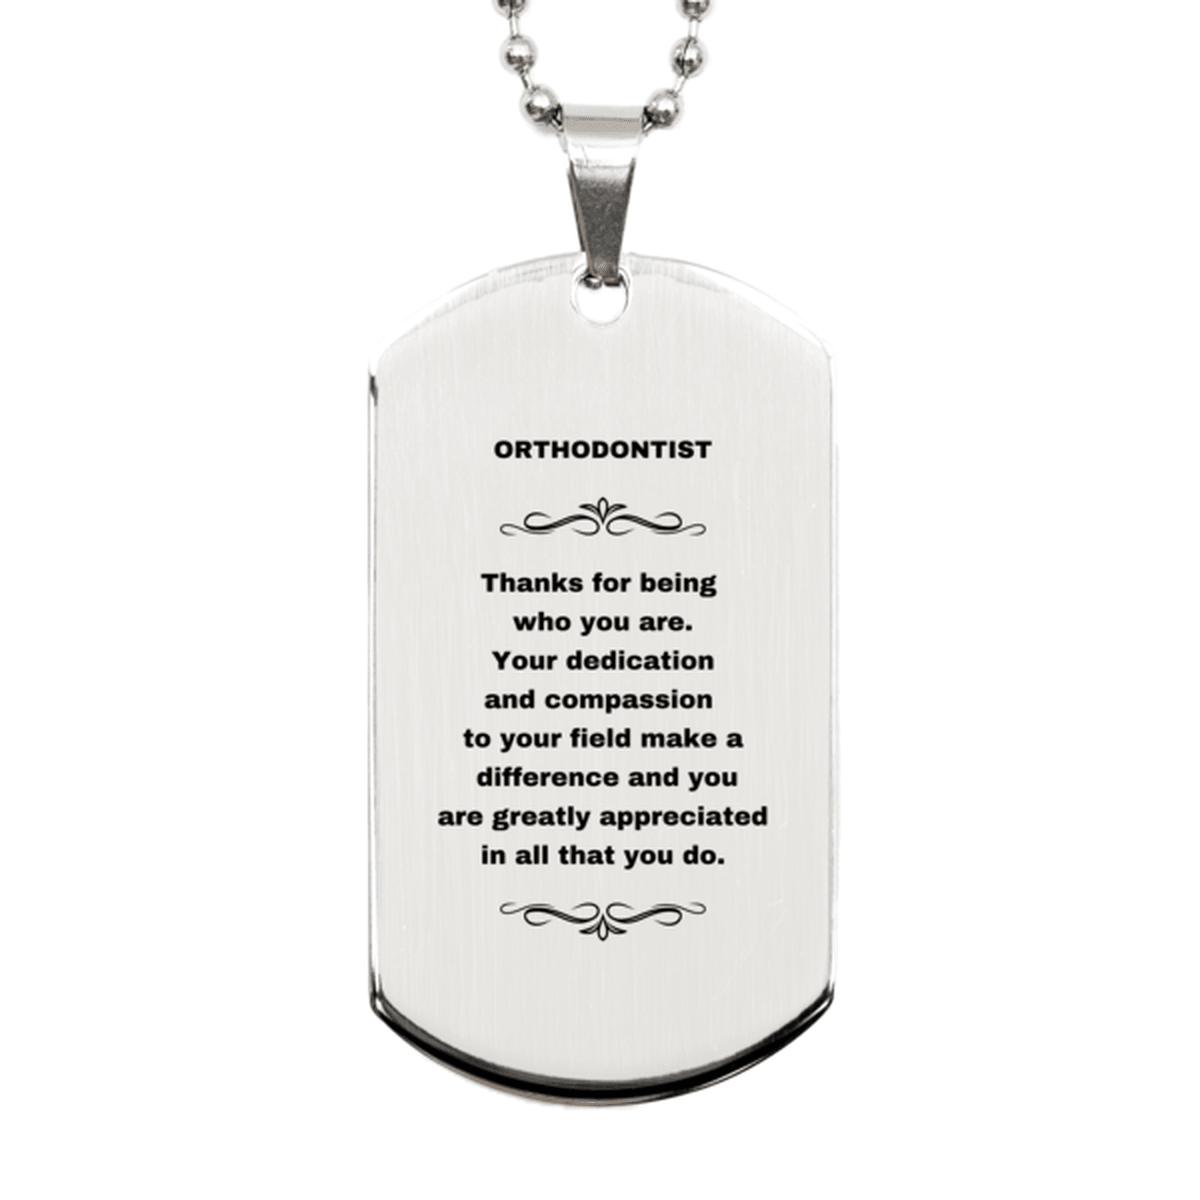 Orthodontist Silver Dog Tag Engraved Necklace - Thanks for being who you are - Birthday Christmas Jewelry Gifts Coworkers Colleague Boss - Mallard Moon Gift Shop